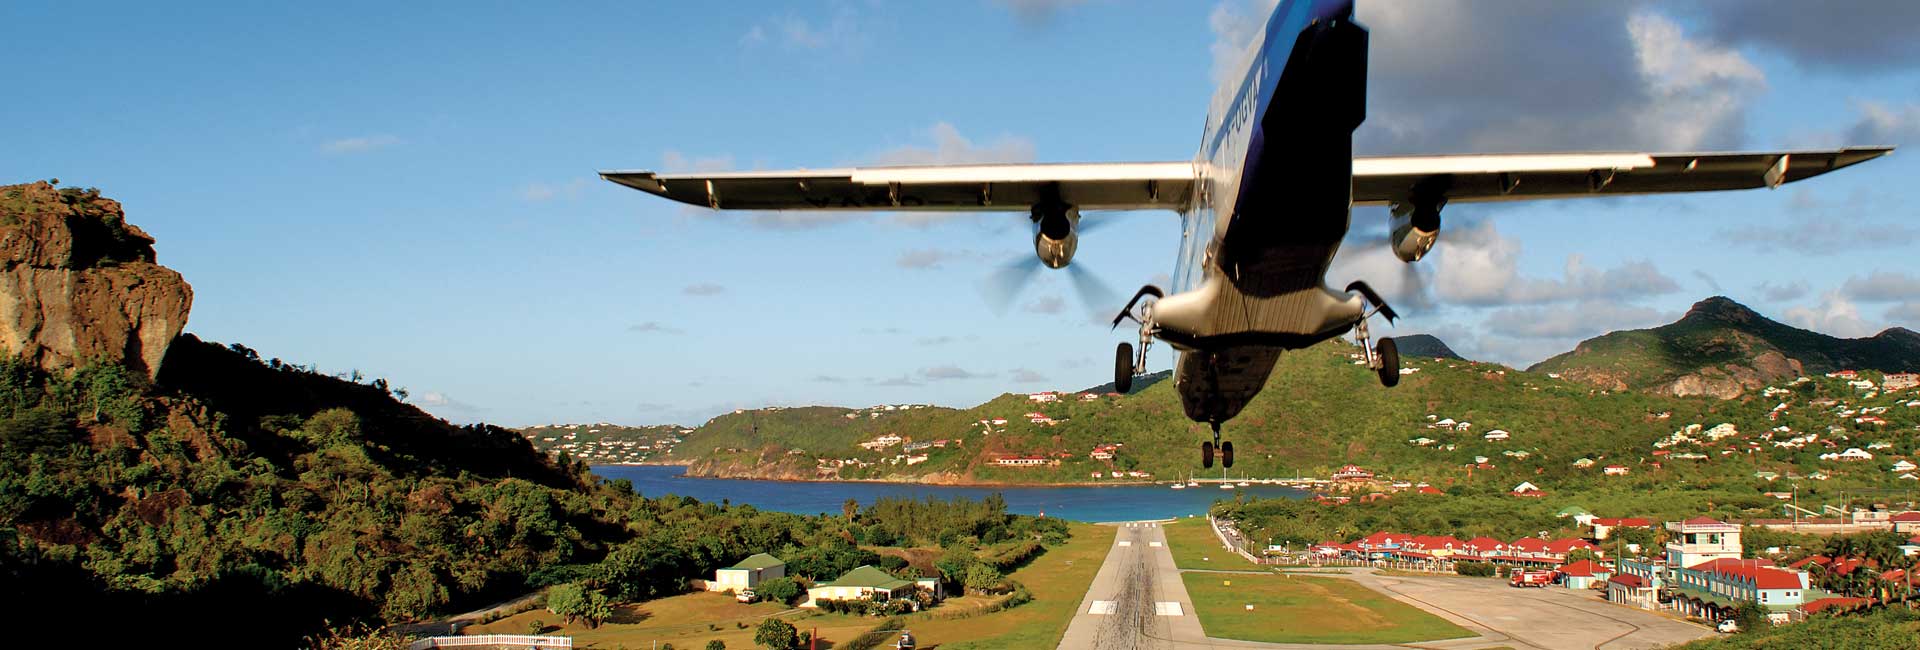 arrival at st barth